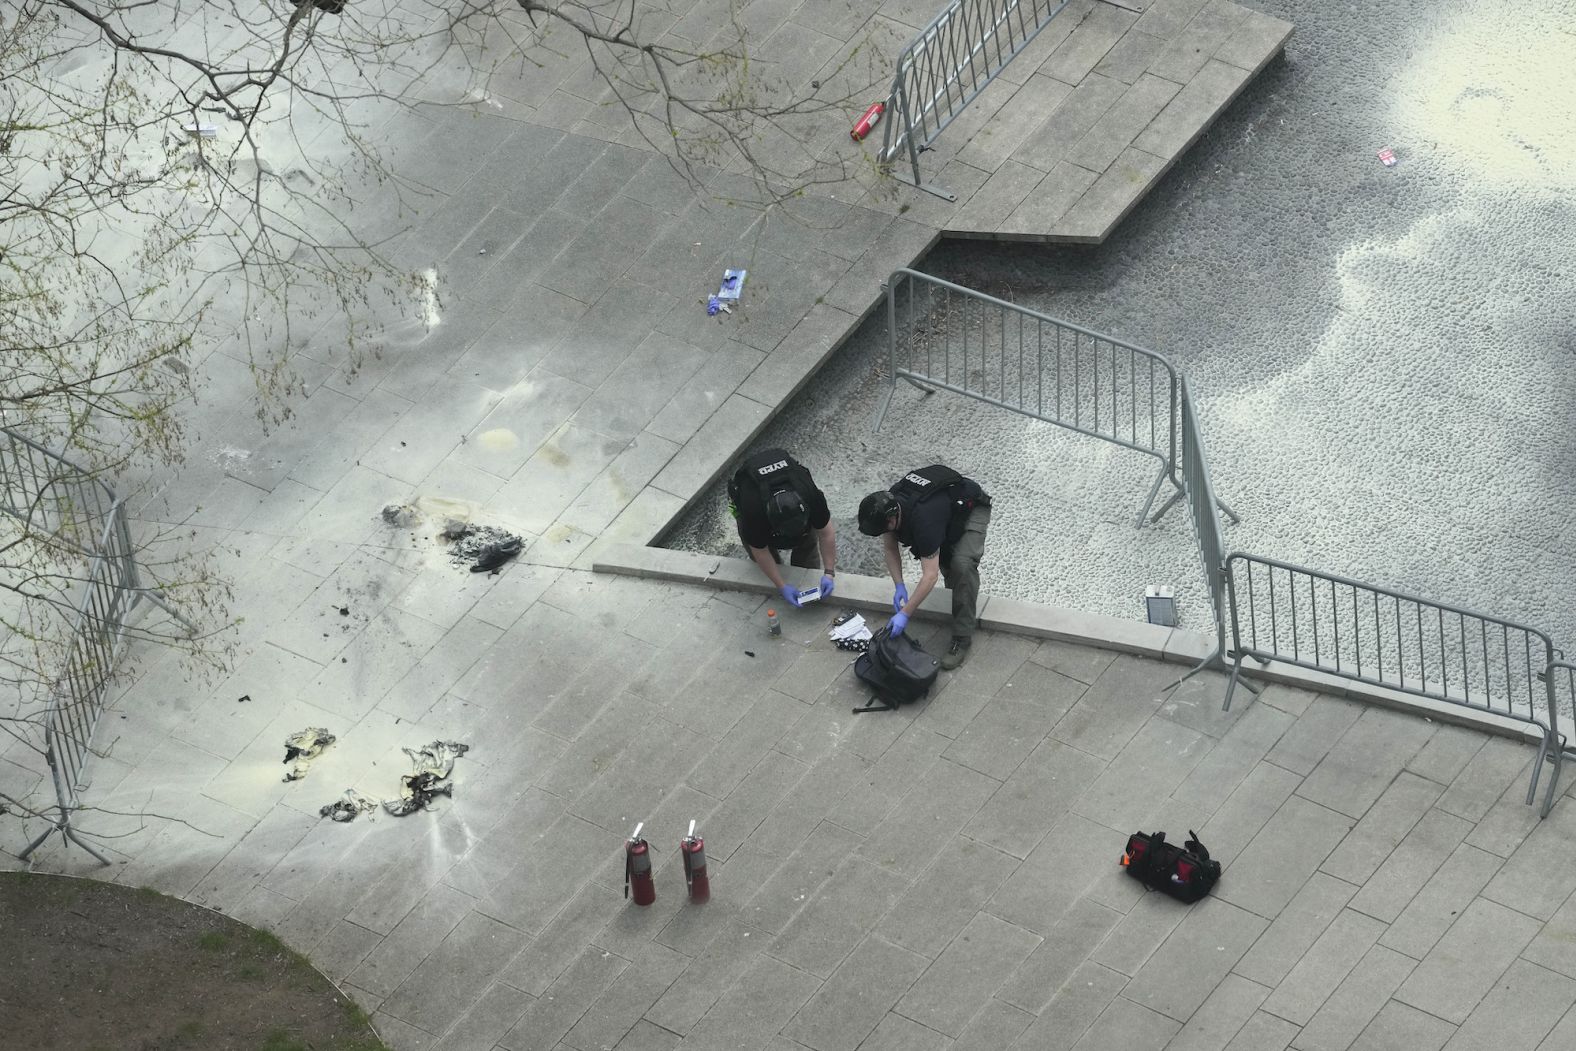 New York police officers inspect a backpack on Friday, April 19, after a man <a href="index.php?page=&url=https%3A%2F%2Fwww.cnn.com%2Fpolitics%2Flive-news%2Ftrump-hush-money-trial-04-19-24%2Fh_a0c5ea747751ddad7bc88749d2f559d1" target="_blank">lit himself on fire</a> in a park outside the criminal court in Manhattan where former US President Donald Trump is standing trial.